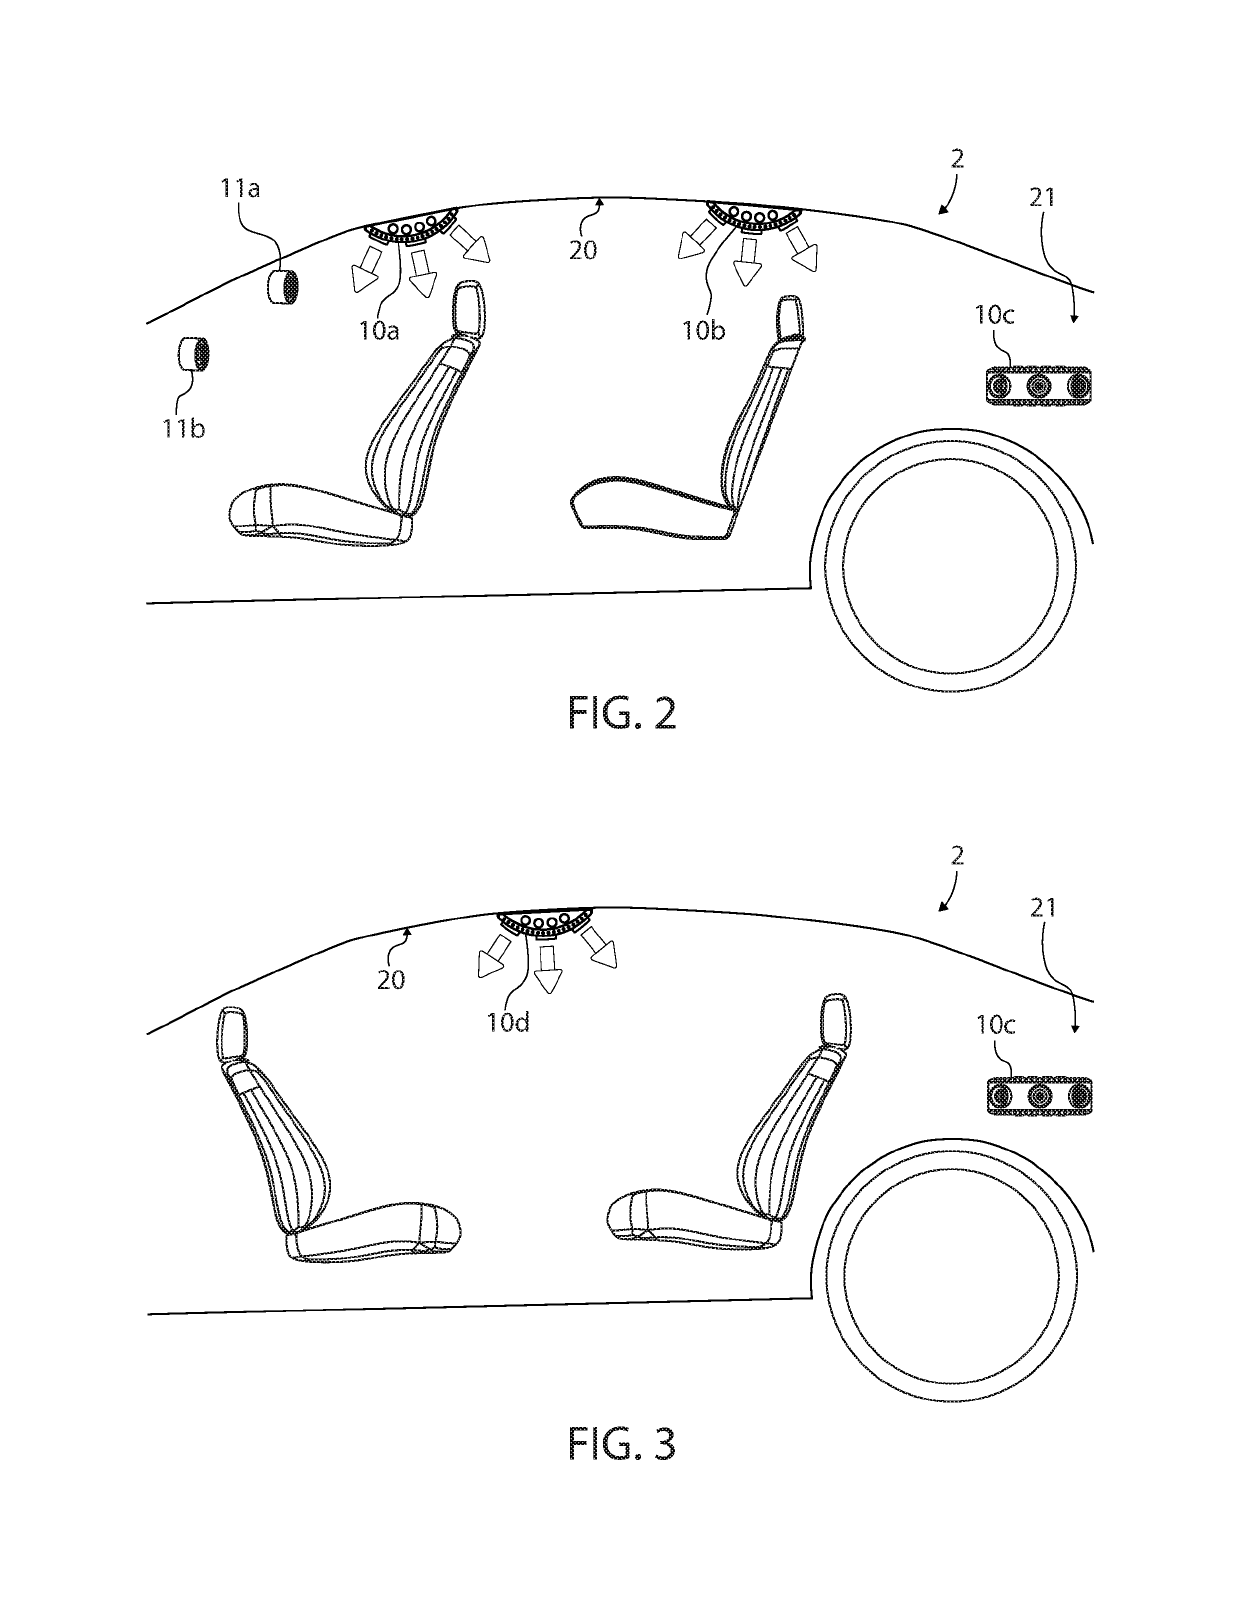 System for managing lost, mislaid, or abandoned property in a self-driving vehicle